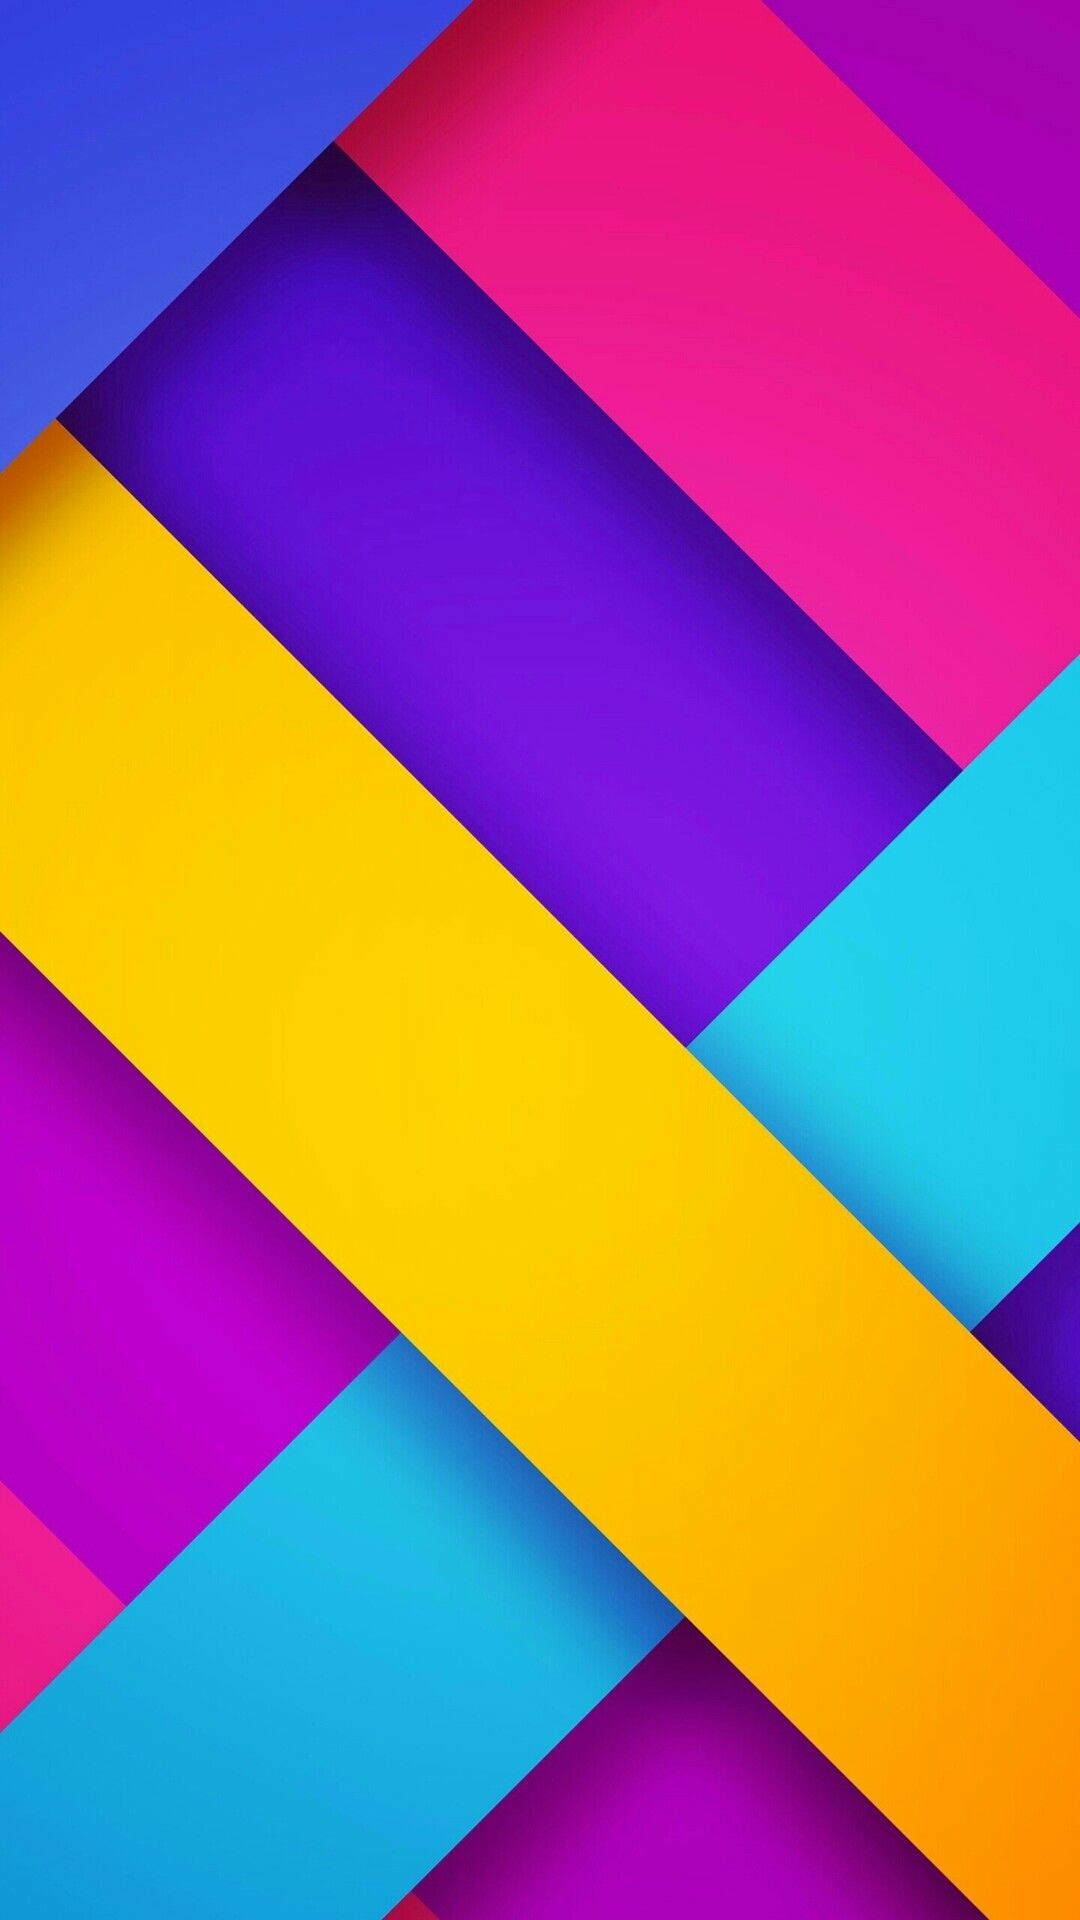 49+ Colorful Wallpapers: HD, 4K, 5K for PC and Mobile | Download free  images for iPhone, Android